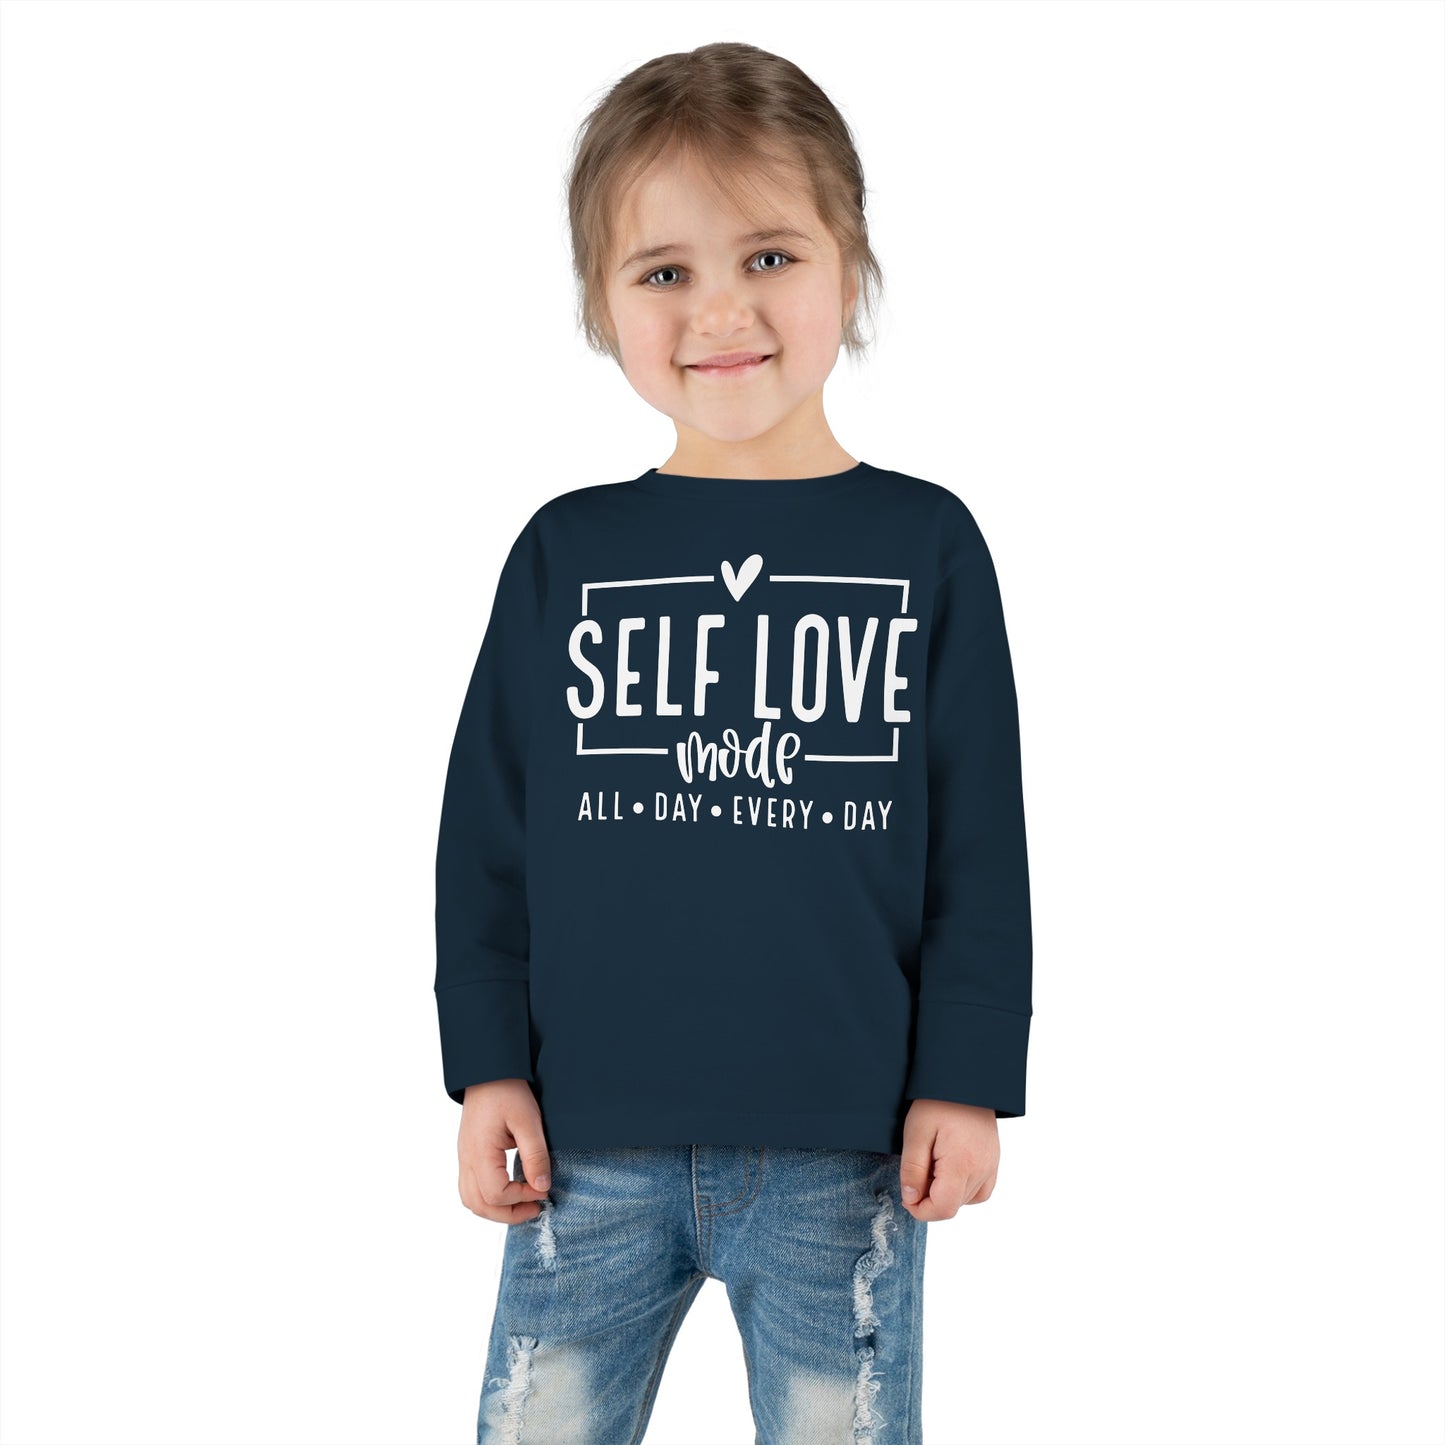 Self Love Mode - All Day Every Day - Heart - Toddler Long Sleeve Tee